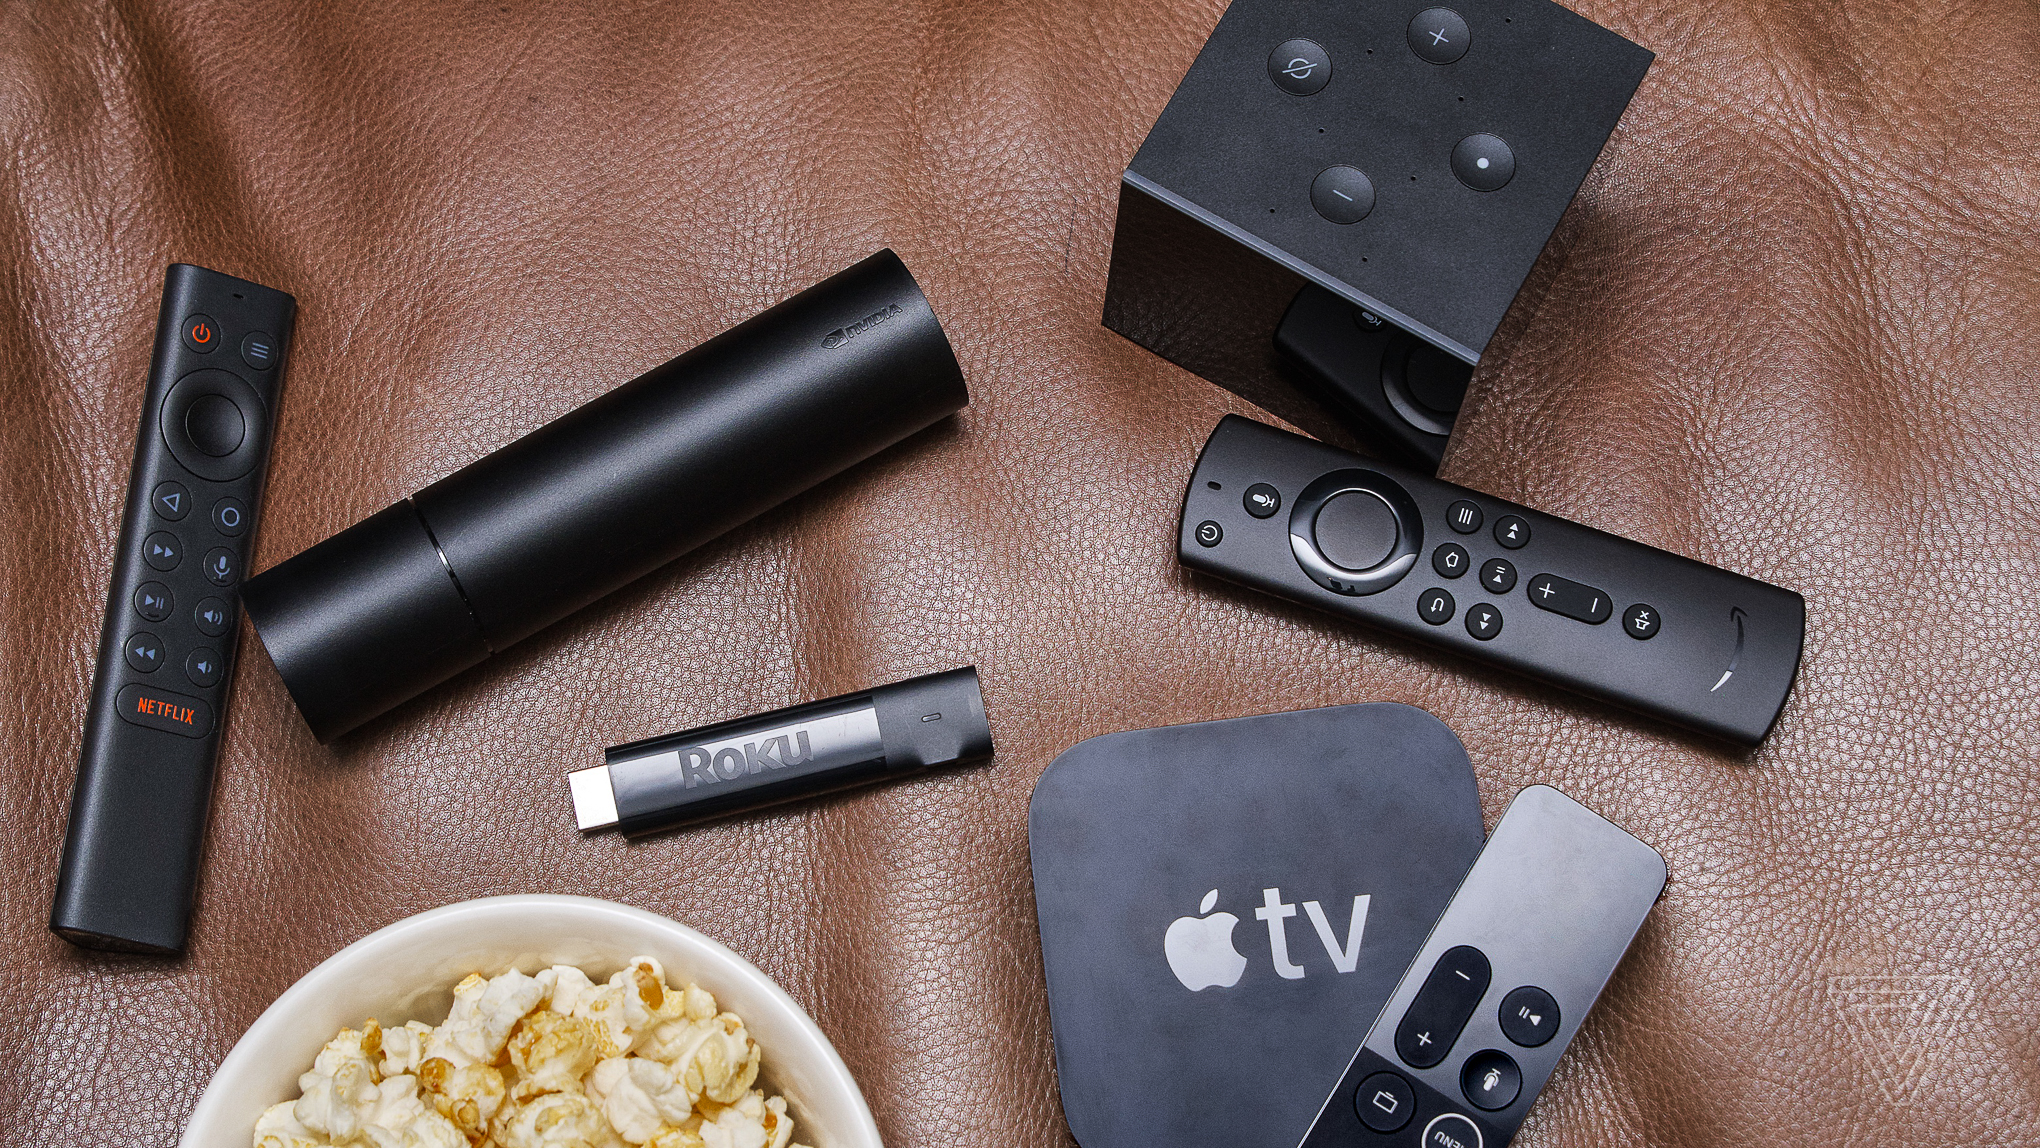 The Apple TV 4K, Amazon Fire Cube, Roku Streaming Stick, and Nvidia Shield streaming devices and remotes laid out on a brown leather couch next to a bowl of popcorn.